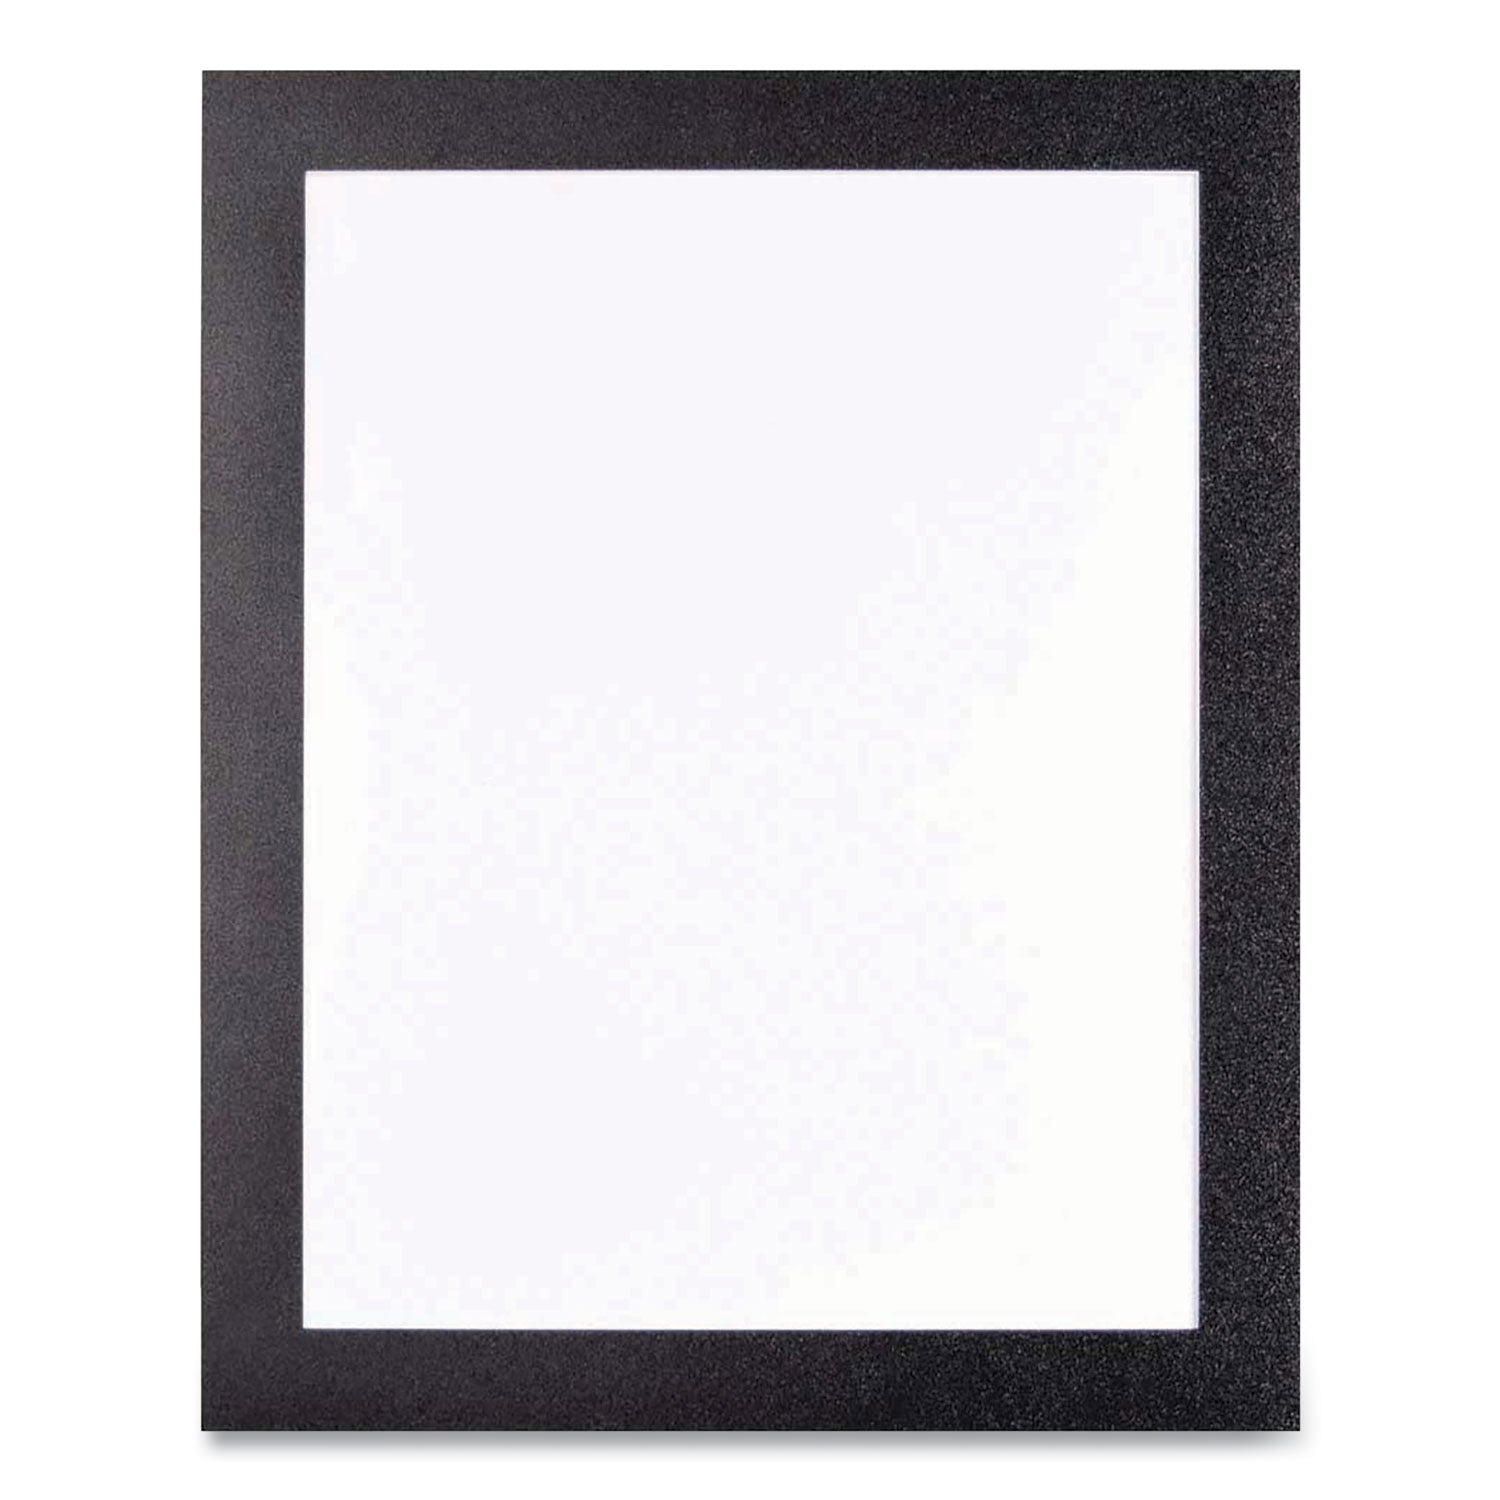 self-adhesive-sign-holders-85-x-11-insert-clear-with-black-border-2-pack_def68776b - 1